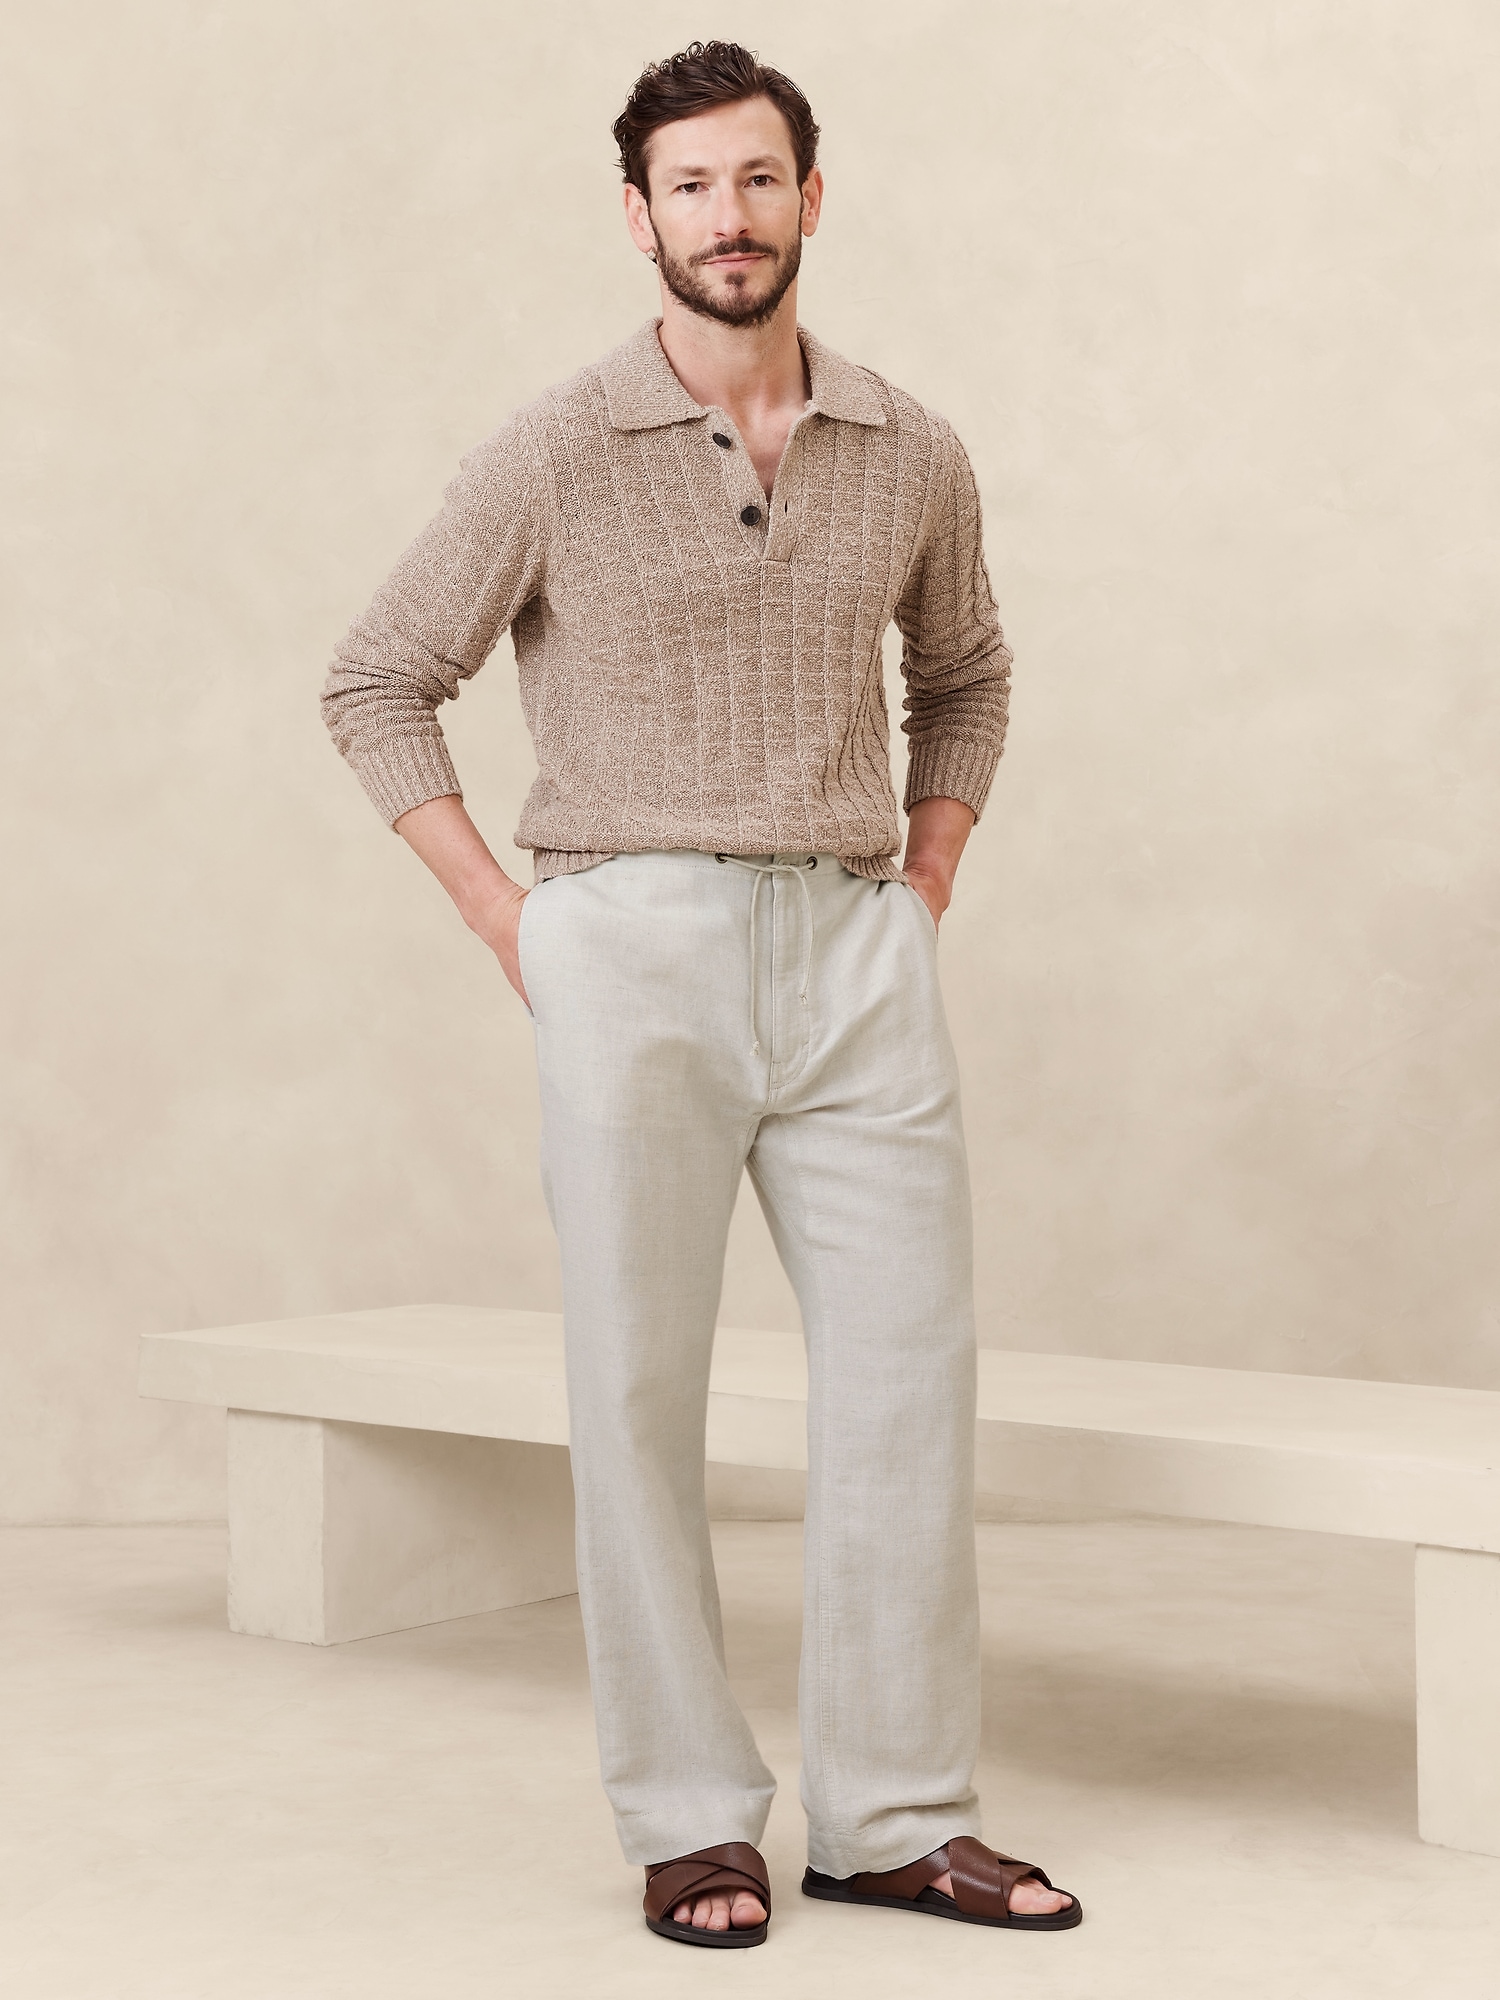 Where to Buy The Best Linen Pants for Men for Any Budget | Cool Material